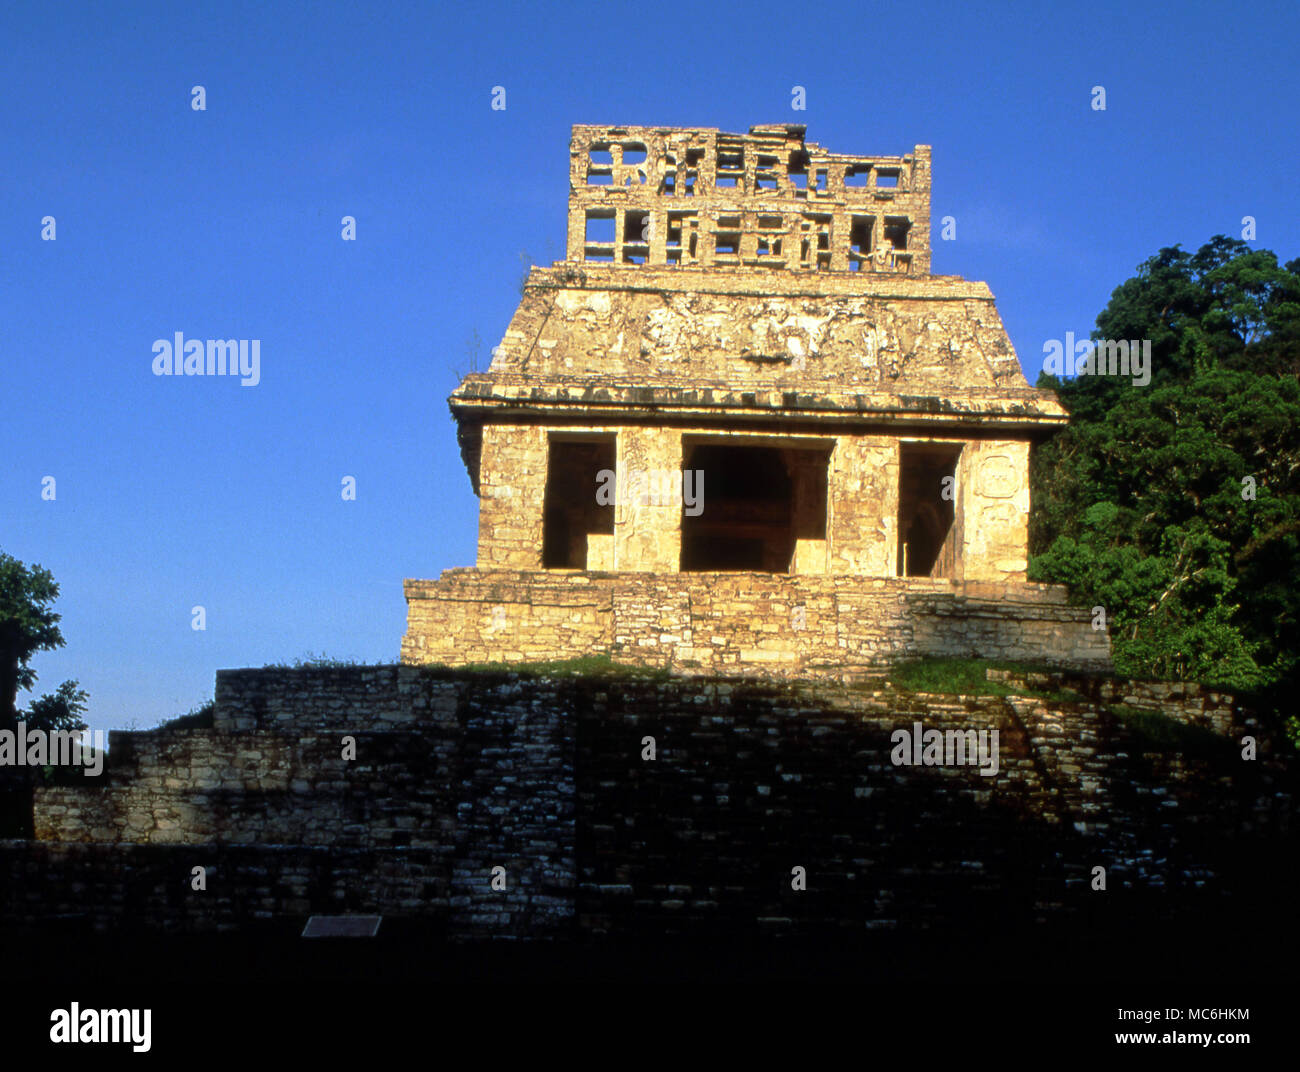 Mexican Archaeology. Palenque Pyramid Temple of the Sun with a well preserved crest. At the rear is a carved solar panel in limestone. Stock Photo